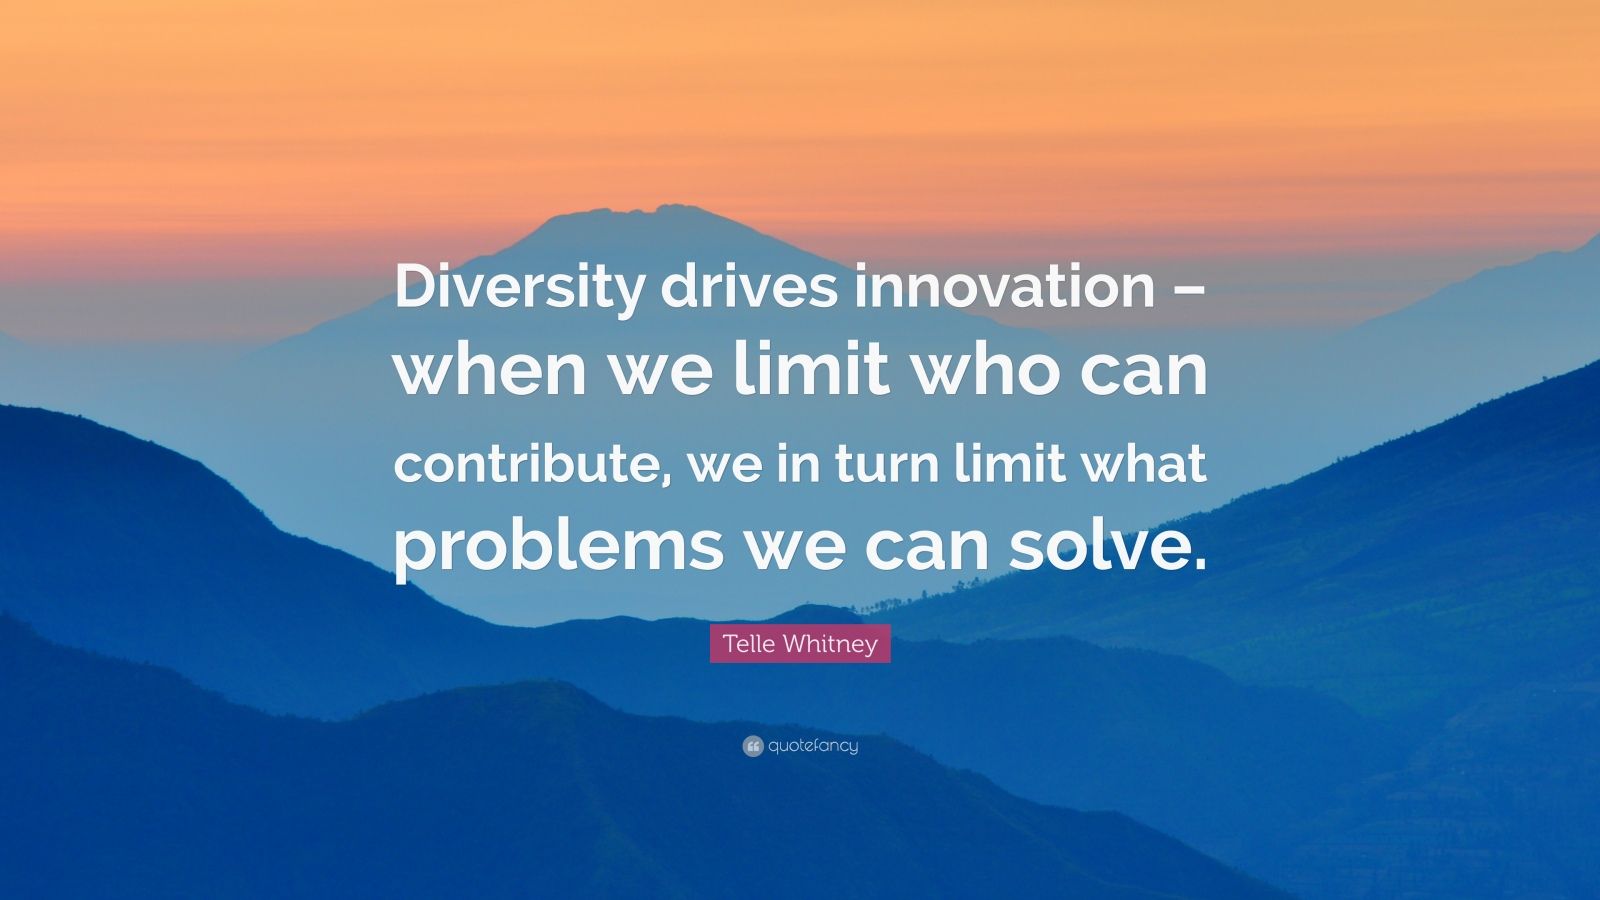 Telle Whitney Quote: “Diversity drives innovation – when we limit who